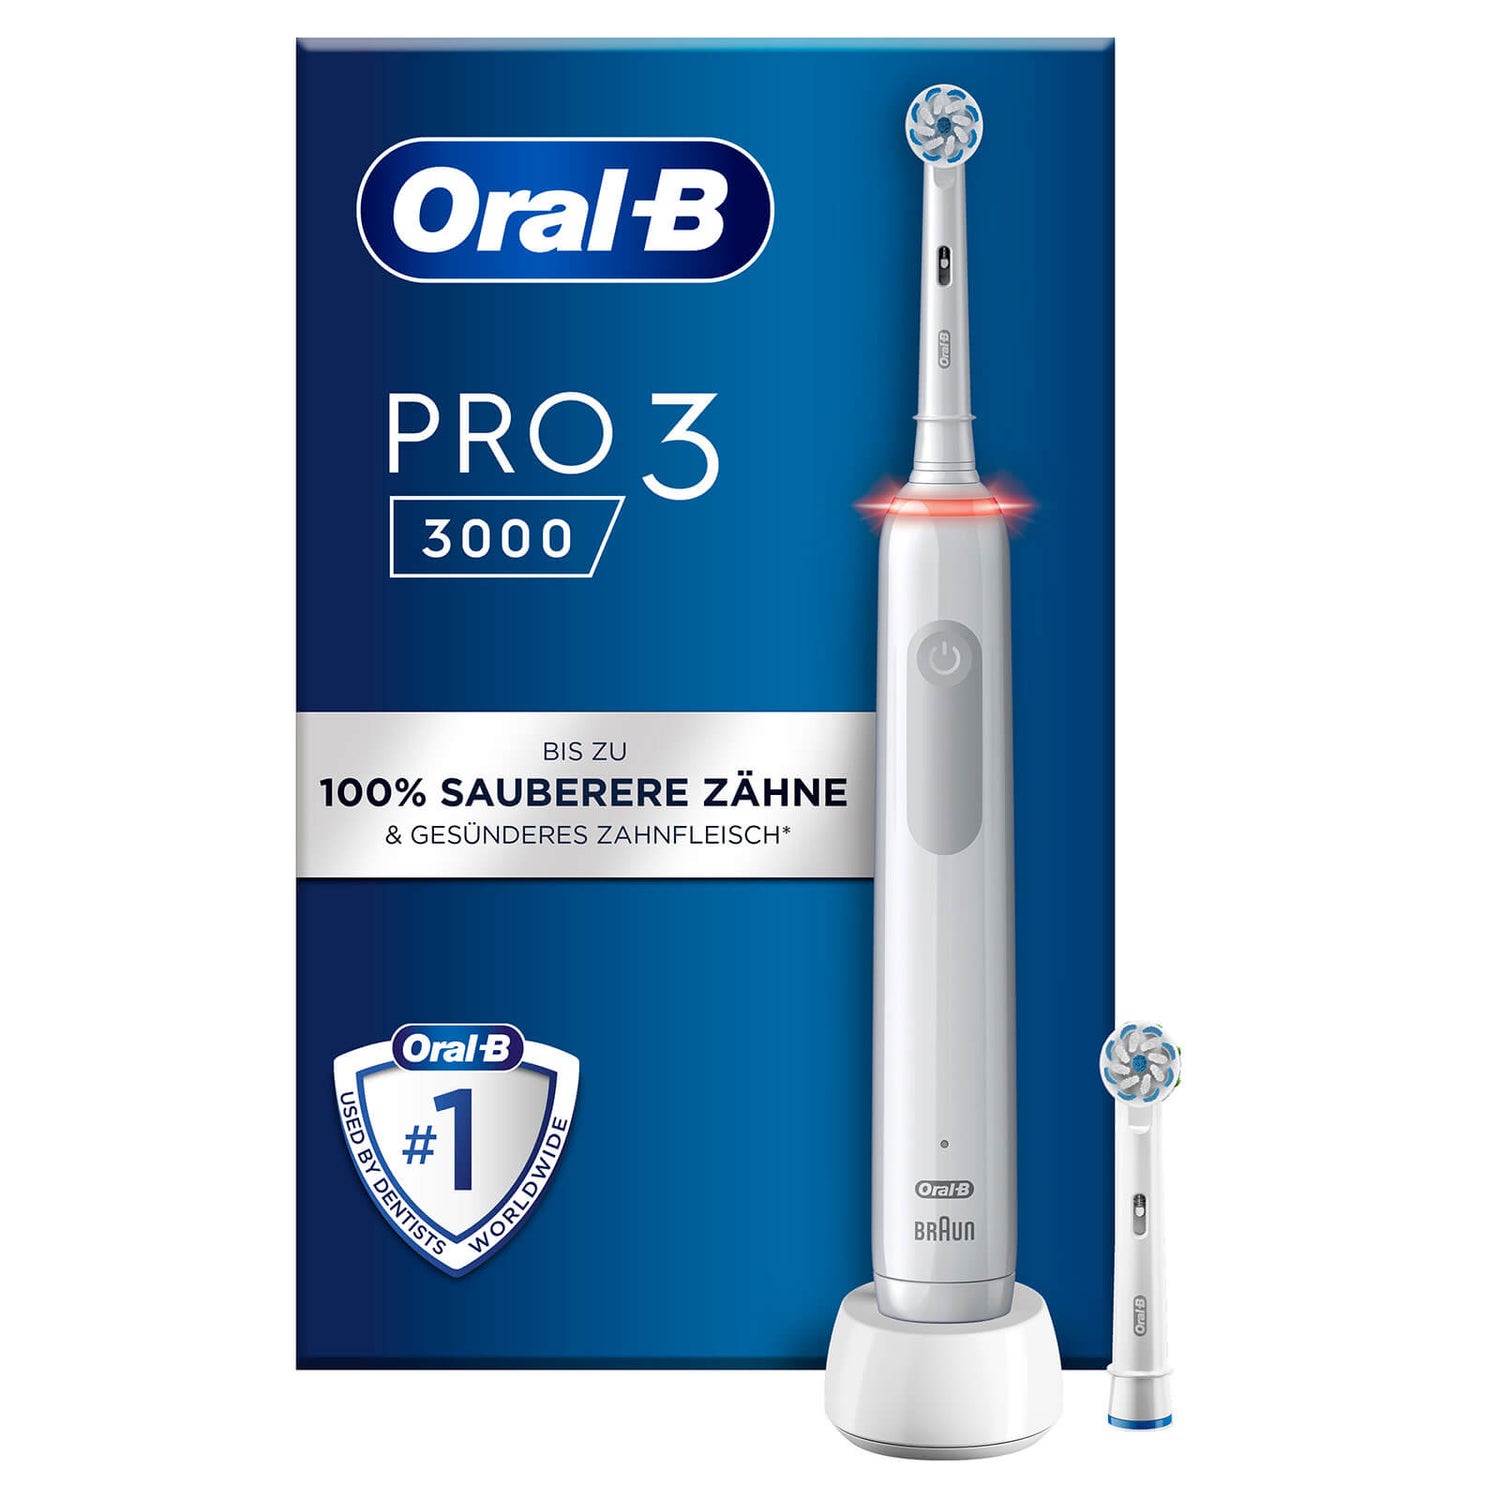 Oral-B Power Pro 3 3000 Electric Toothbrush White